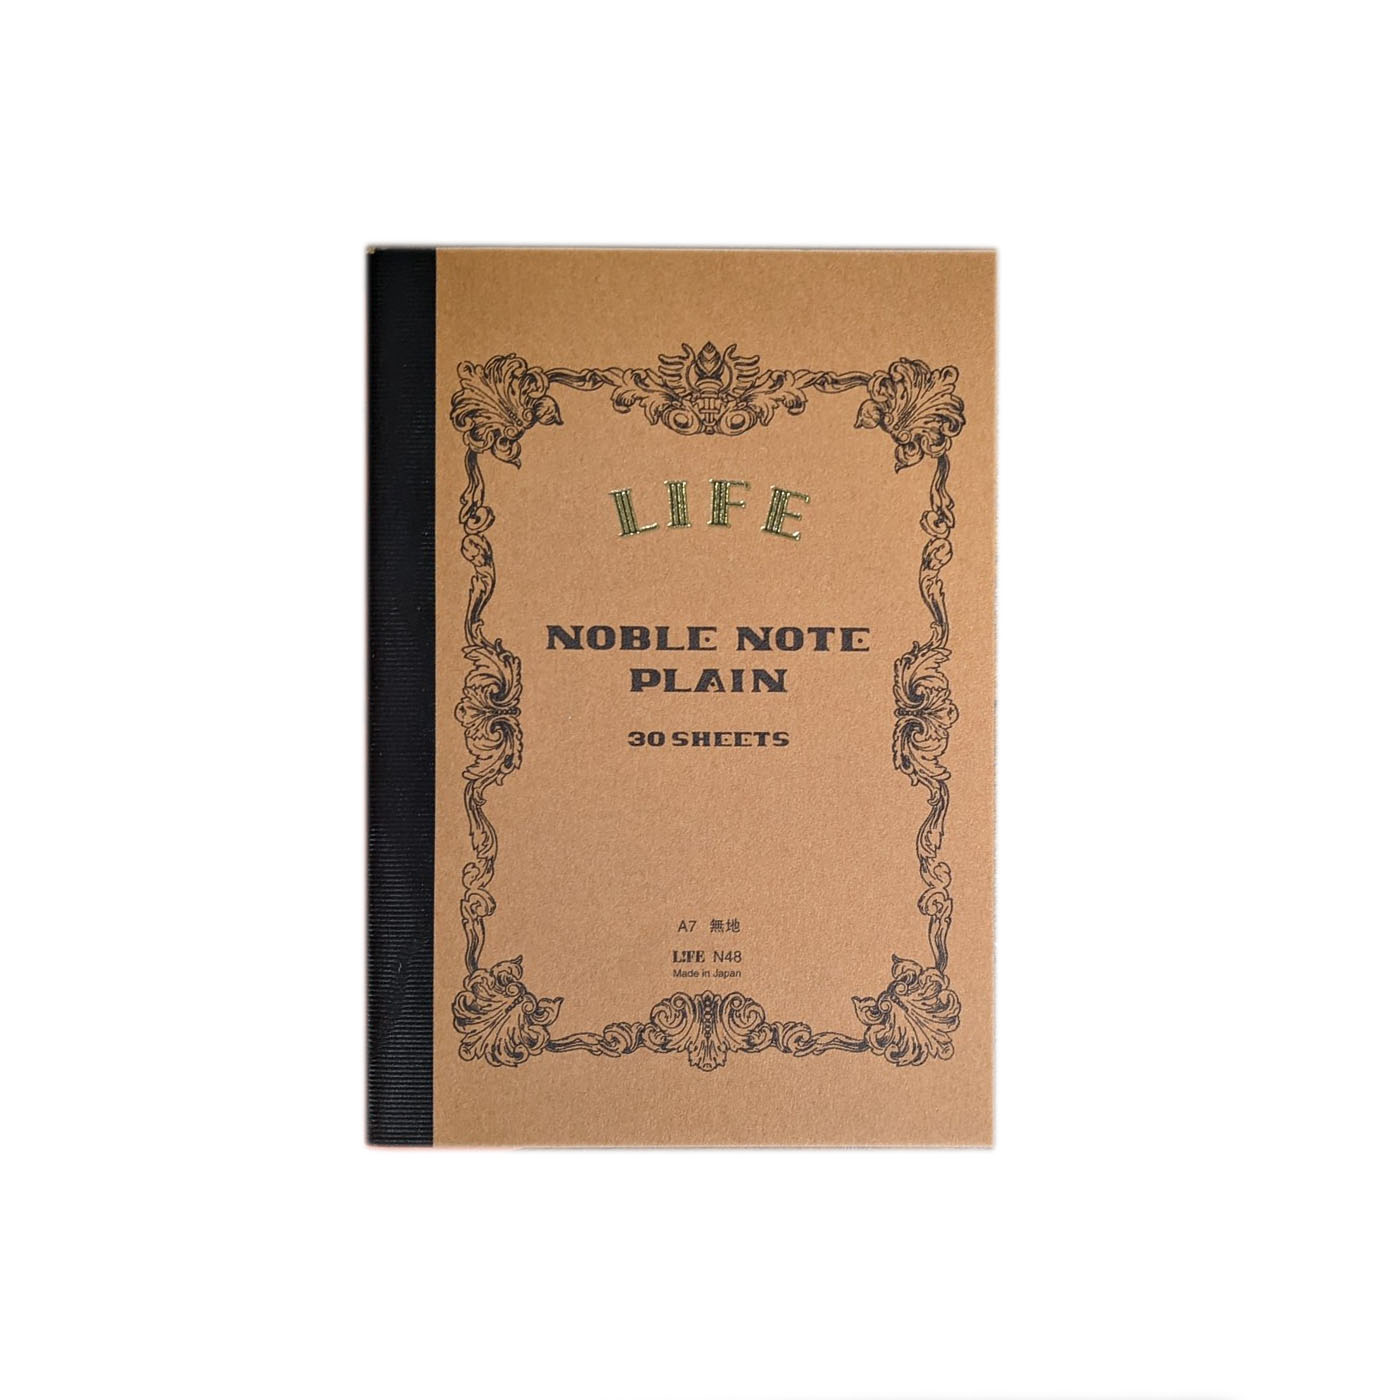 LIFE Japan Noble Note Mini Plain Made in Japan Pocket Notebook Fountain Pen friendly pocket notebook